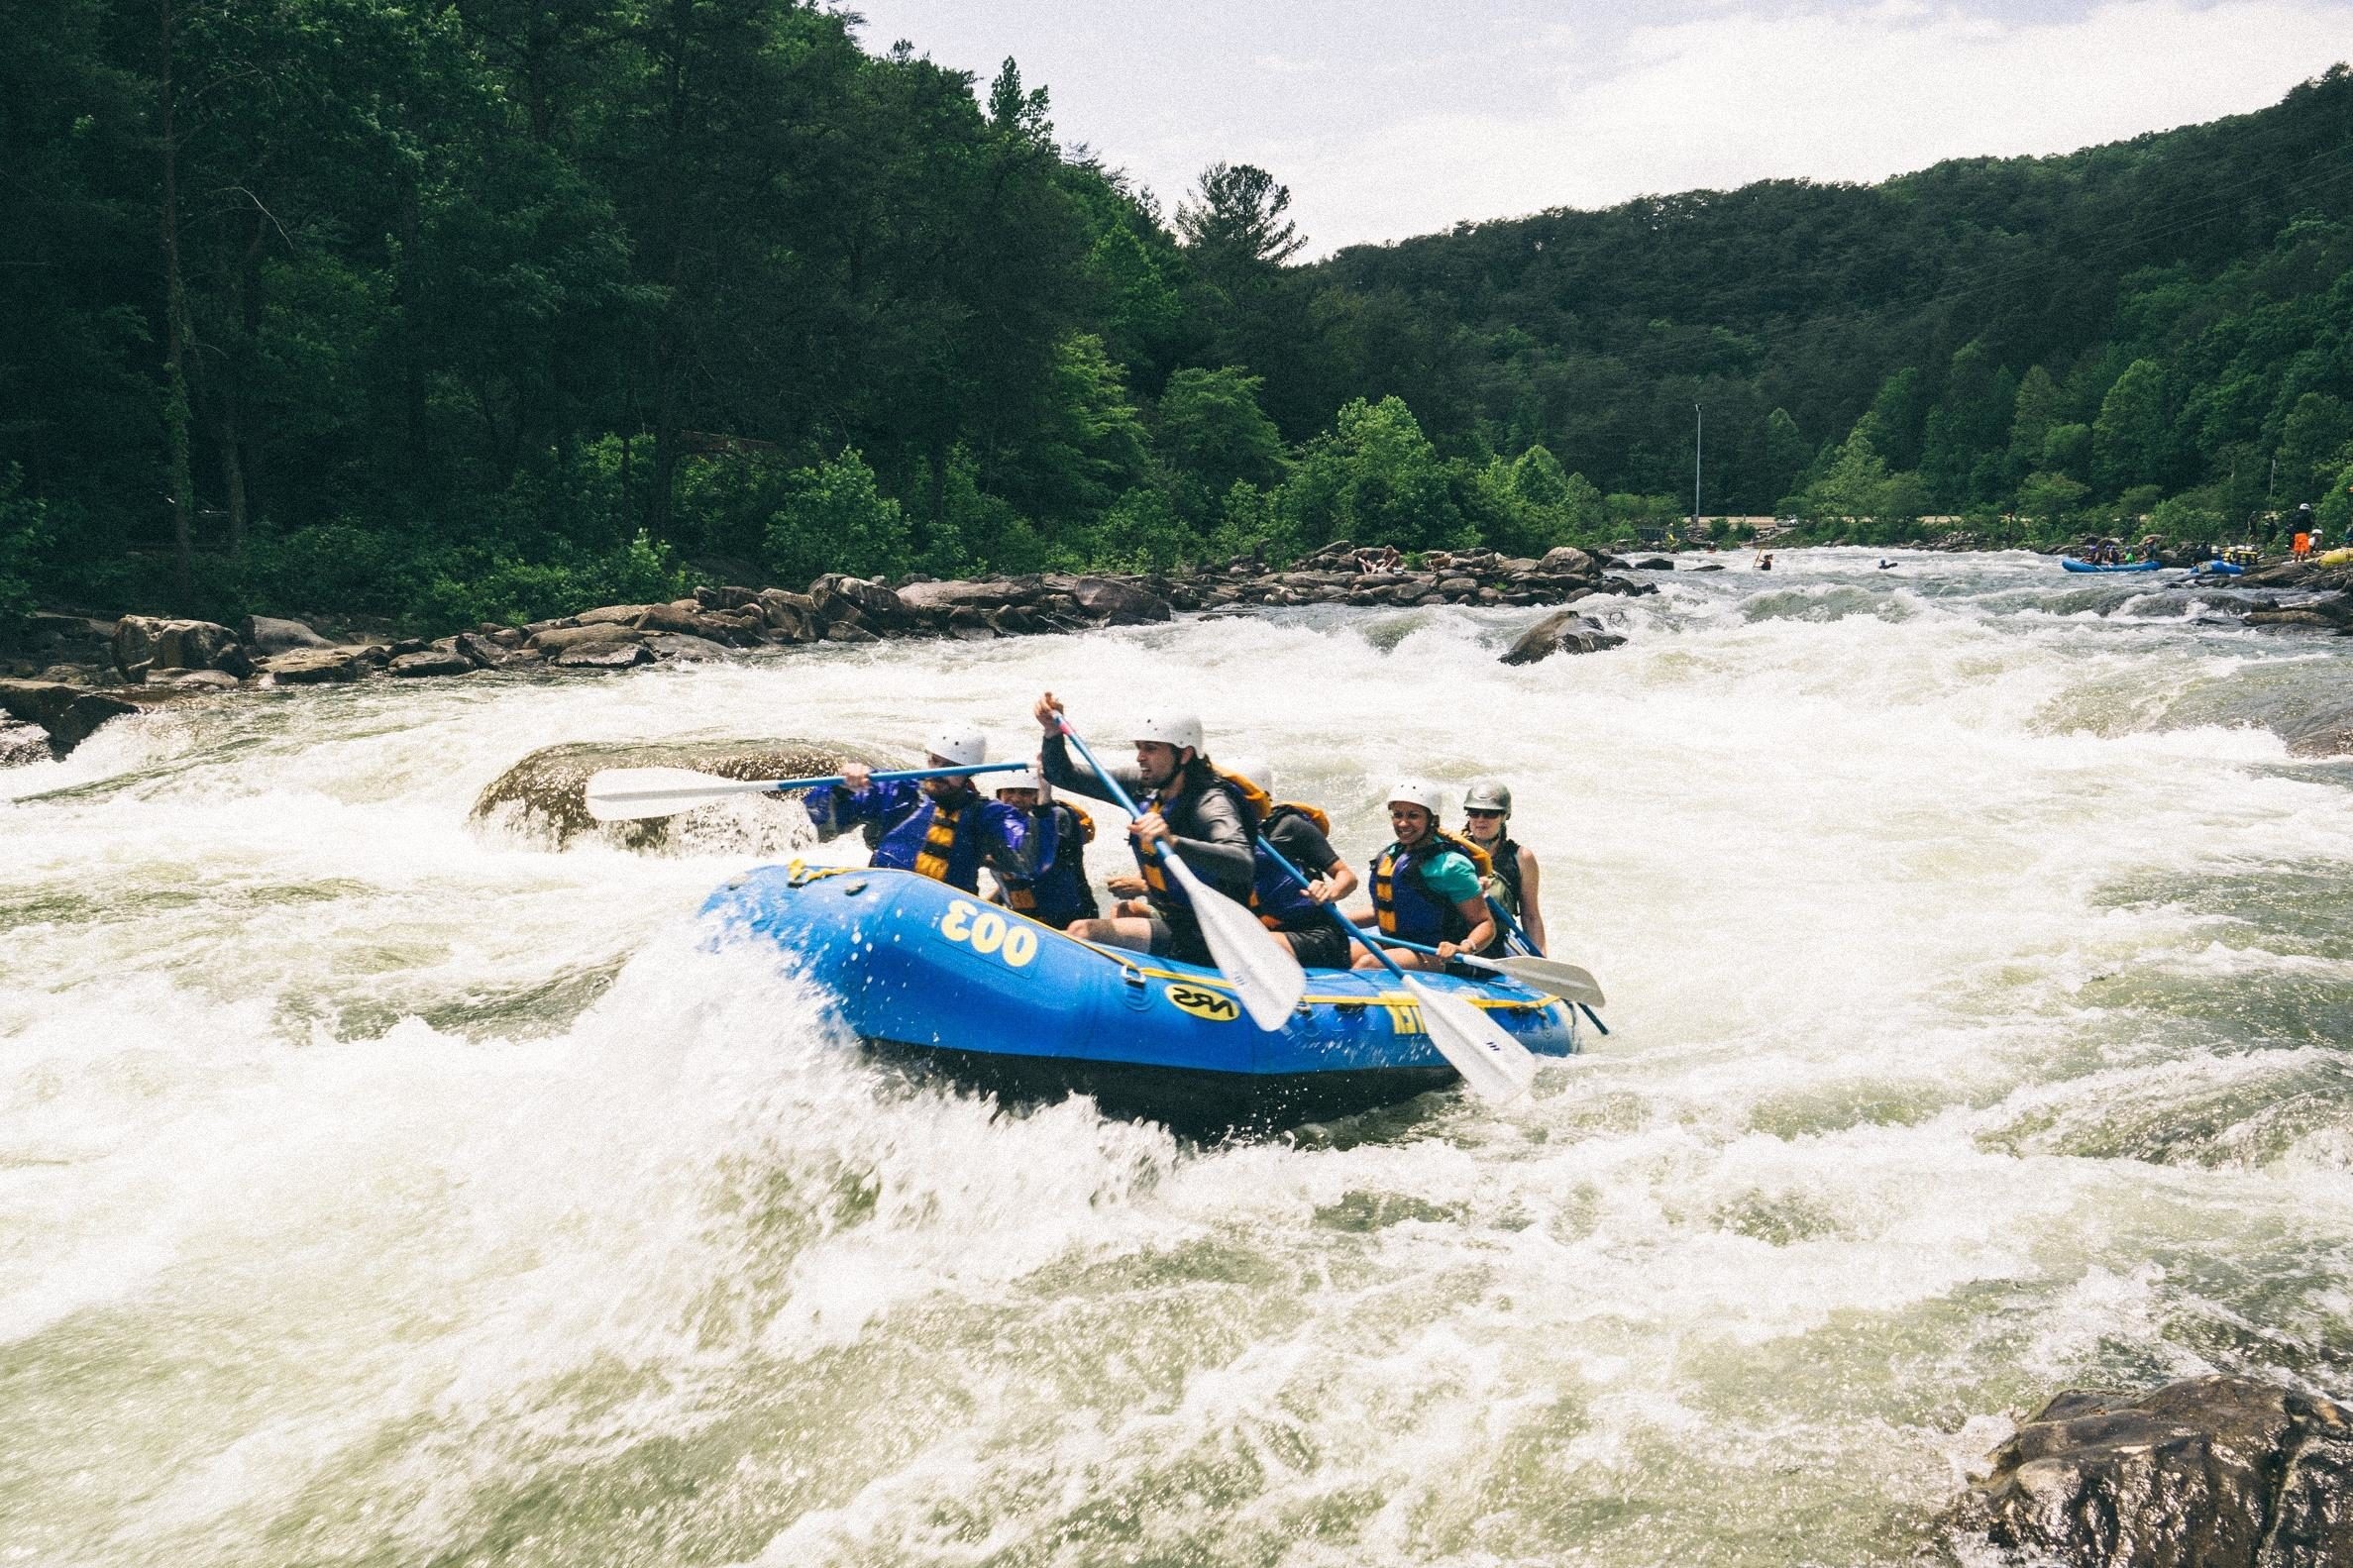 Rafting: A group of extreme tourists performs experienced maneuvering during the whitewater boating. 2380x1590 HD Wallpaper.